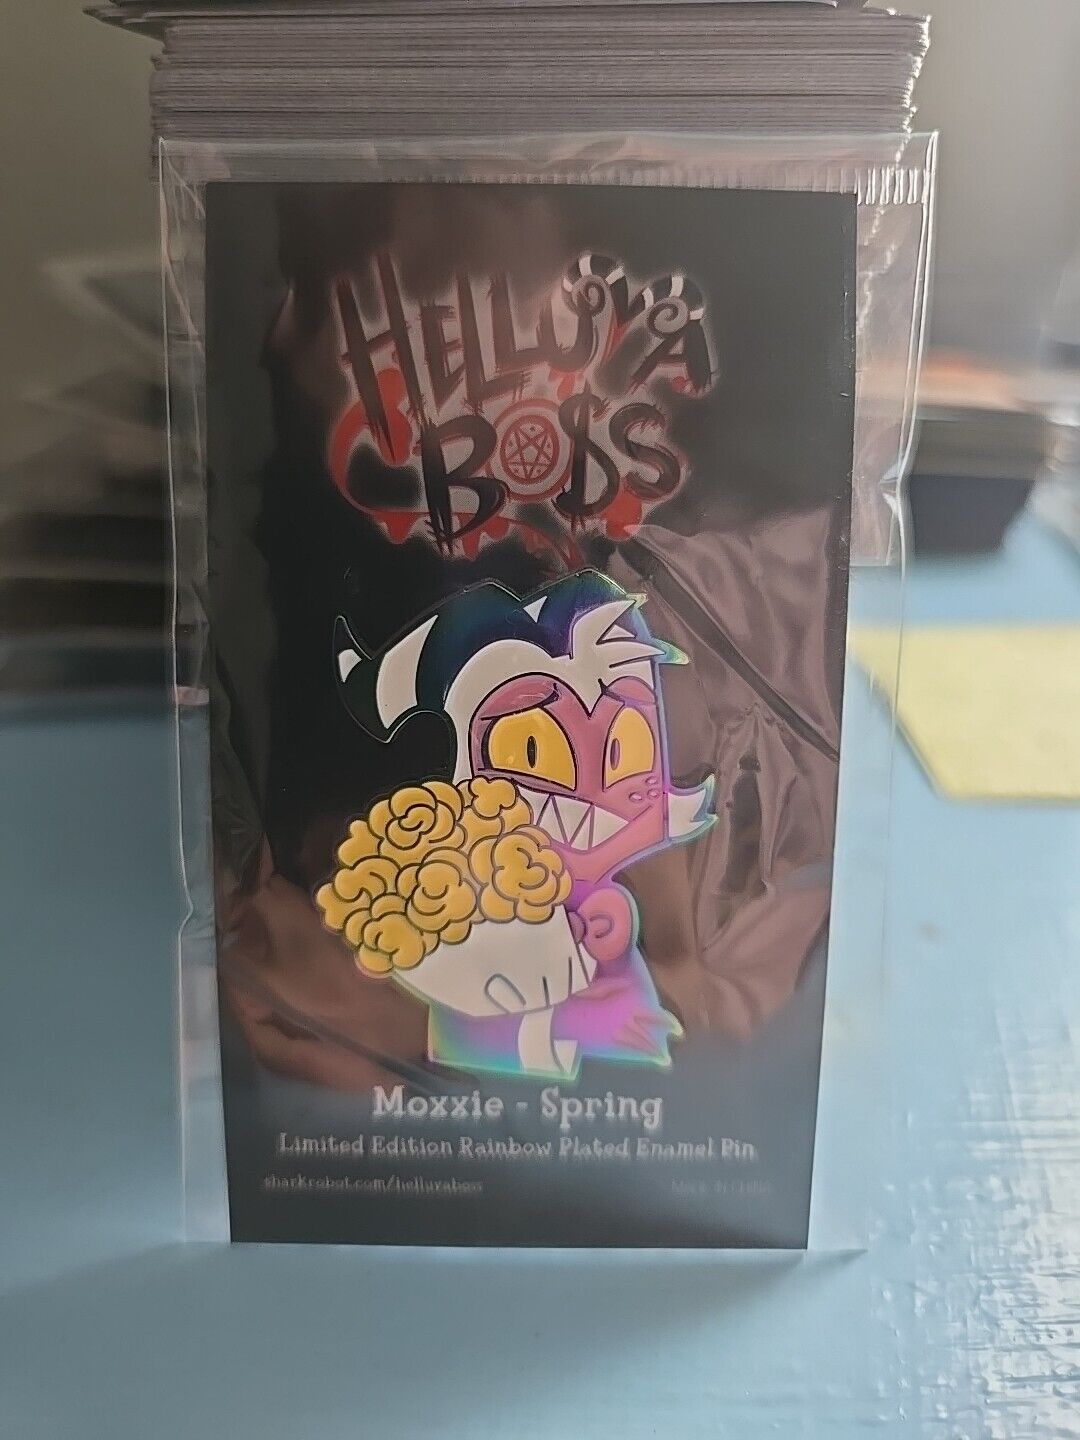 Helluva Boss Moxxie (Spring) Rainbow Plated Enamel Pin - LIMITED - SOLD OUT